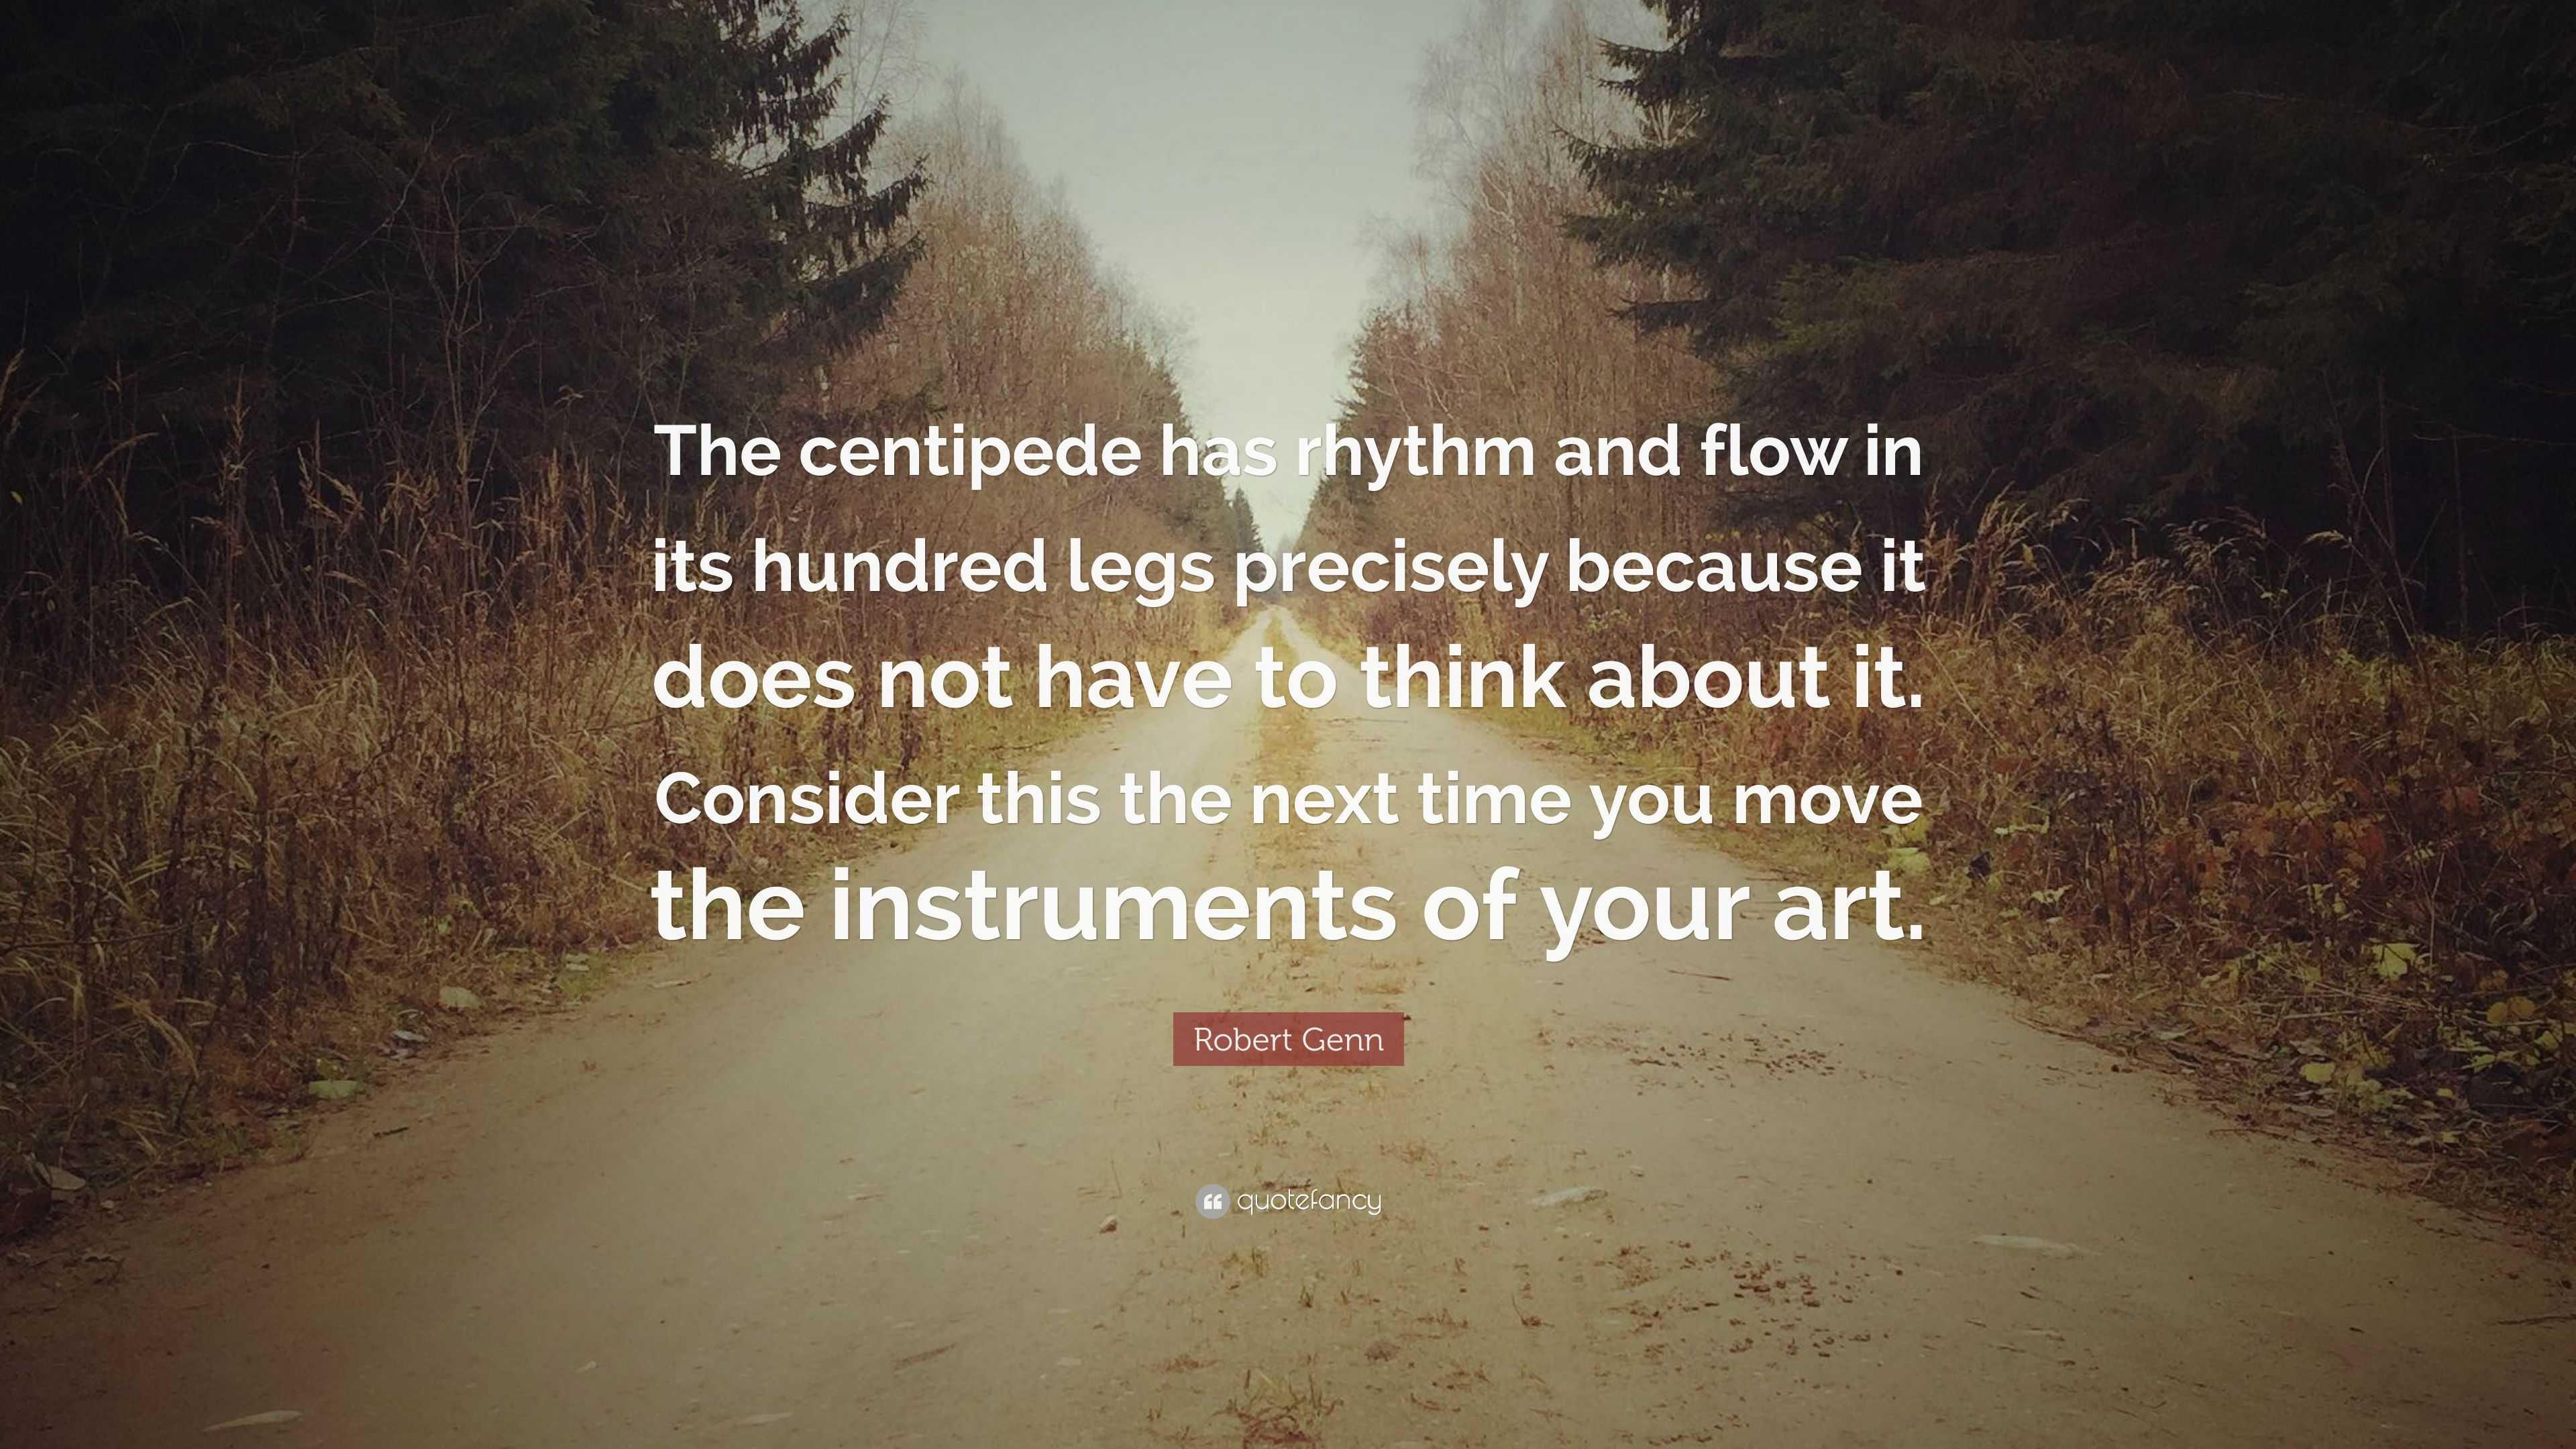 Robert Genn Quote: “The centipede has rhythm and flow in its hundred legs  precisely because it does not have to think about it. Consider thi”